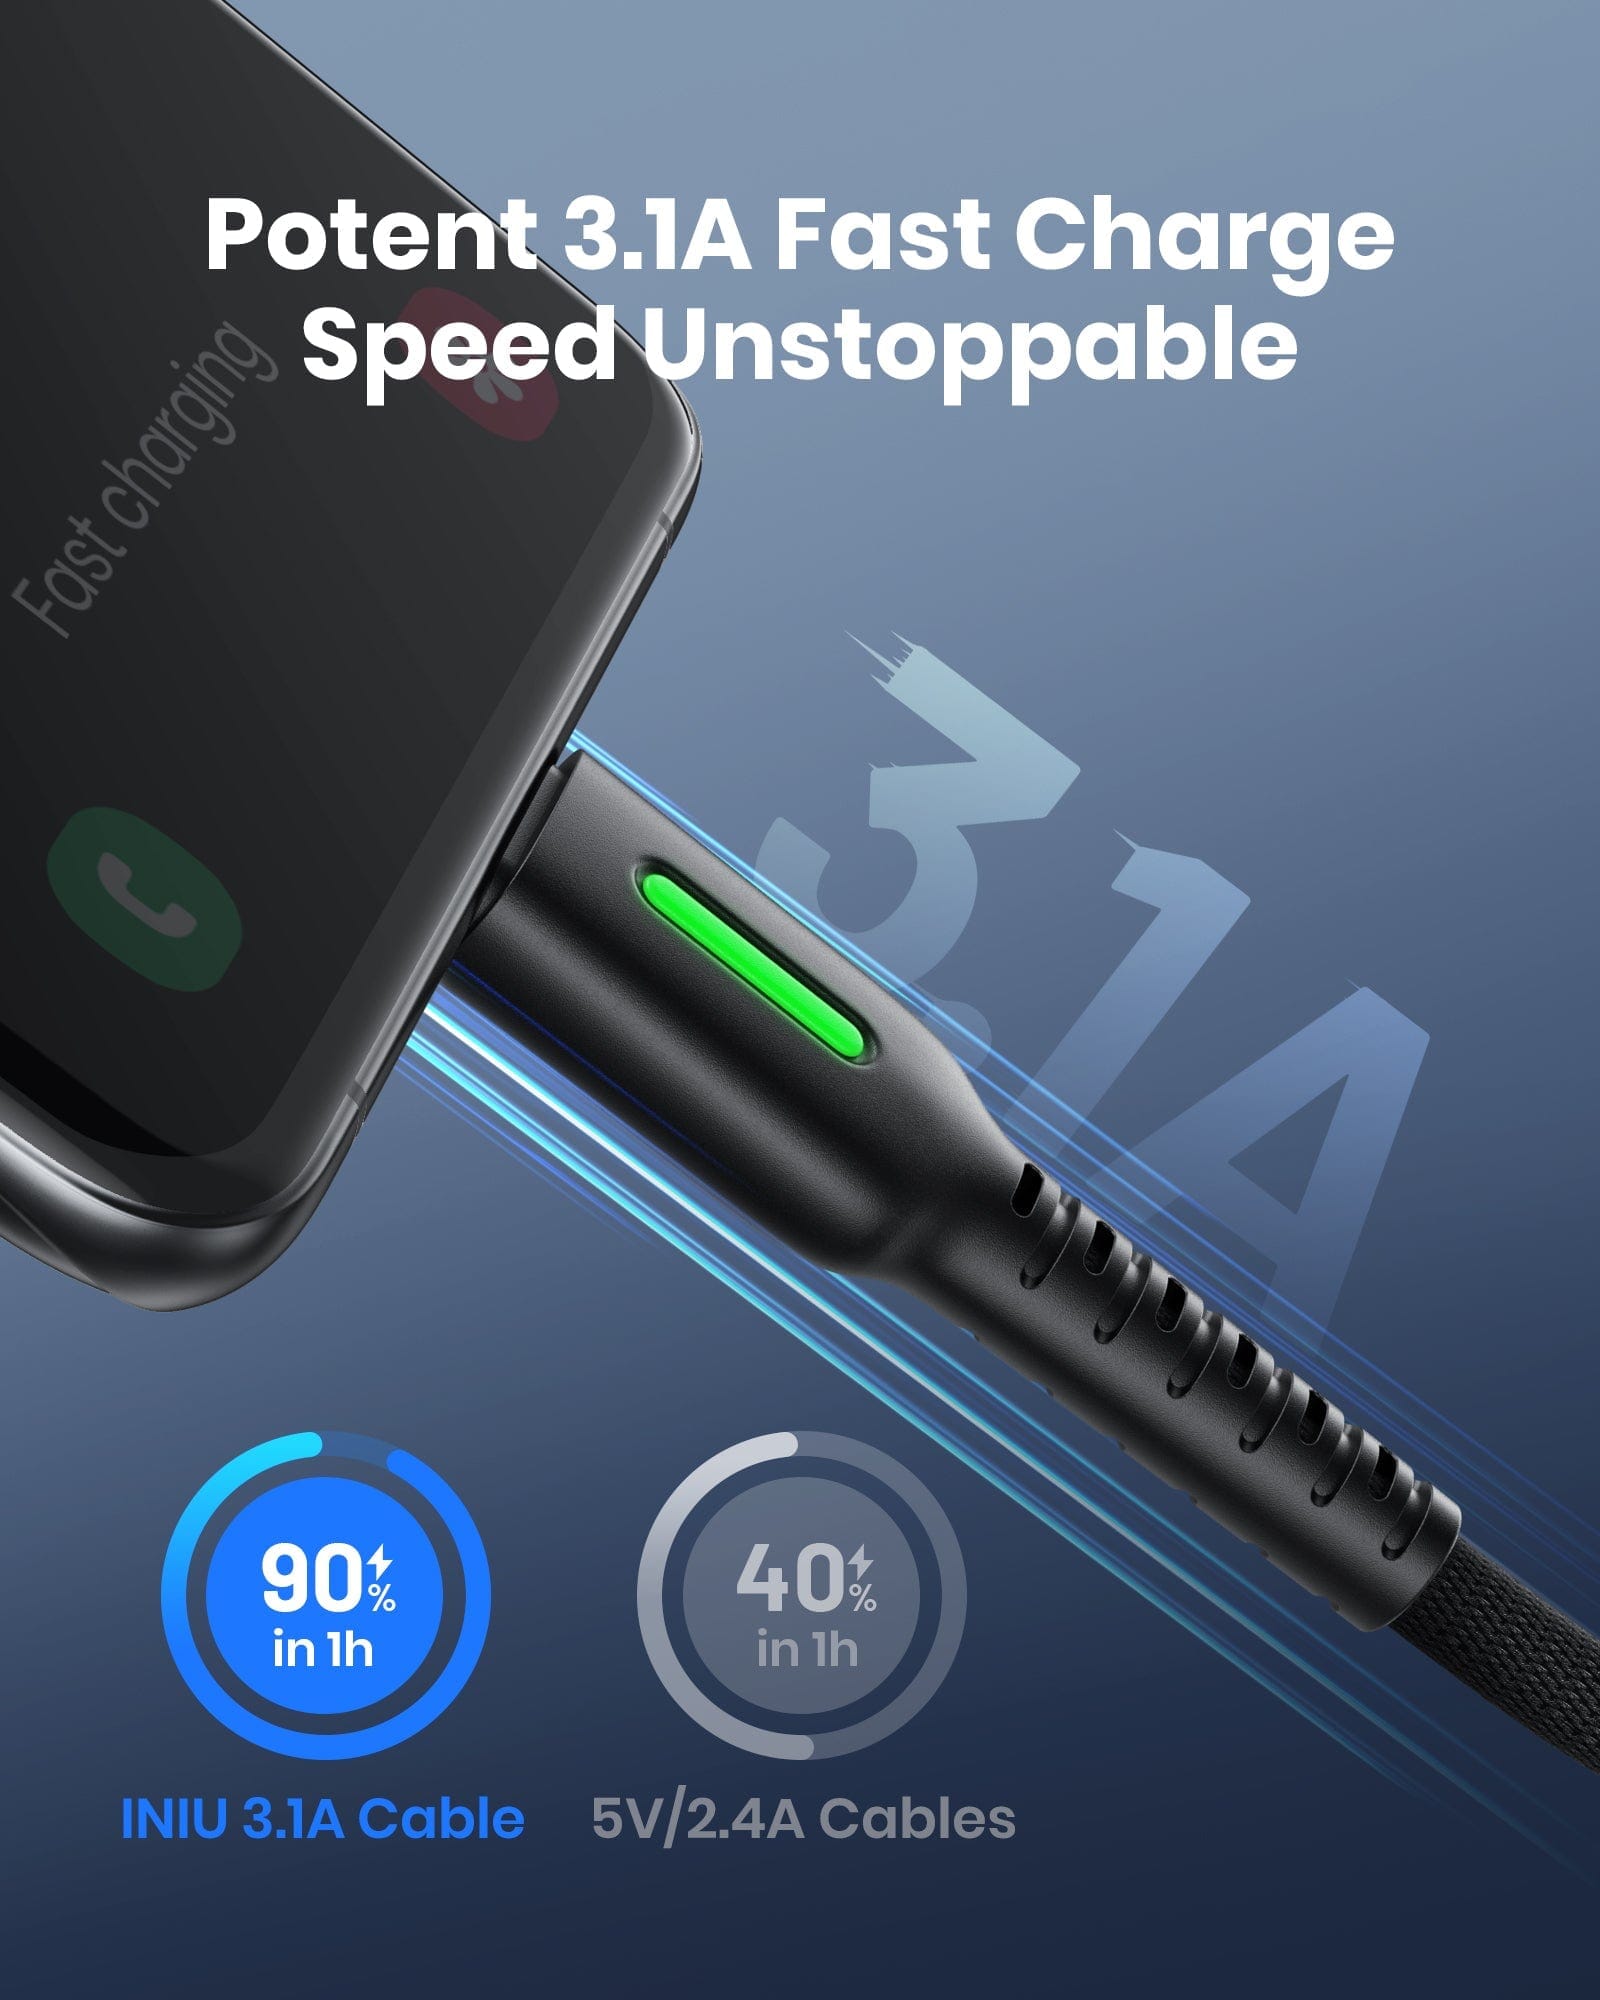 Potent 3.1A Fast Charge Speed Unstoppable